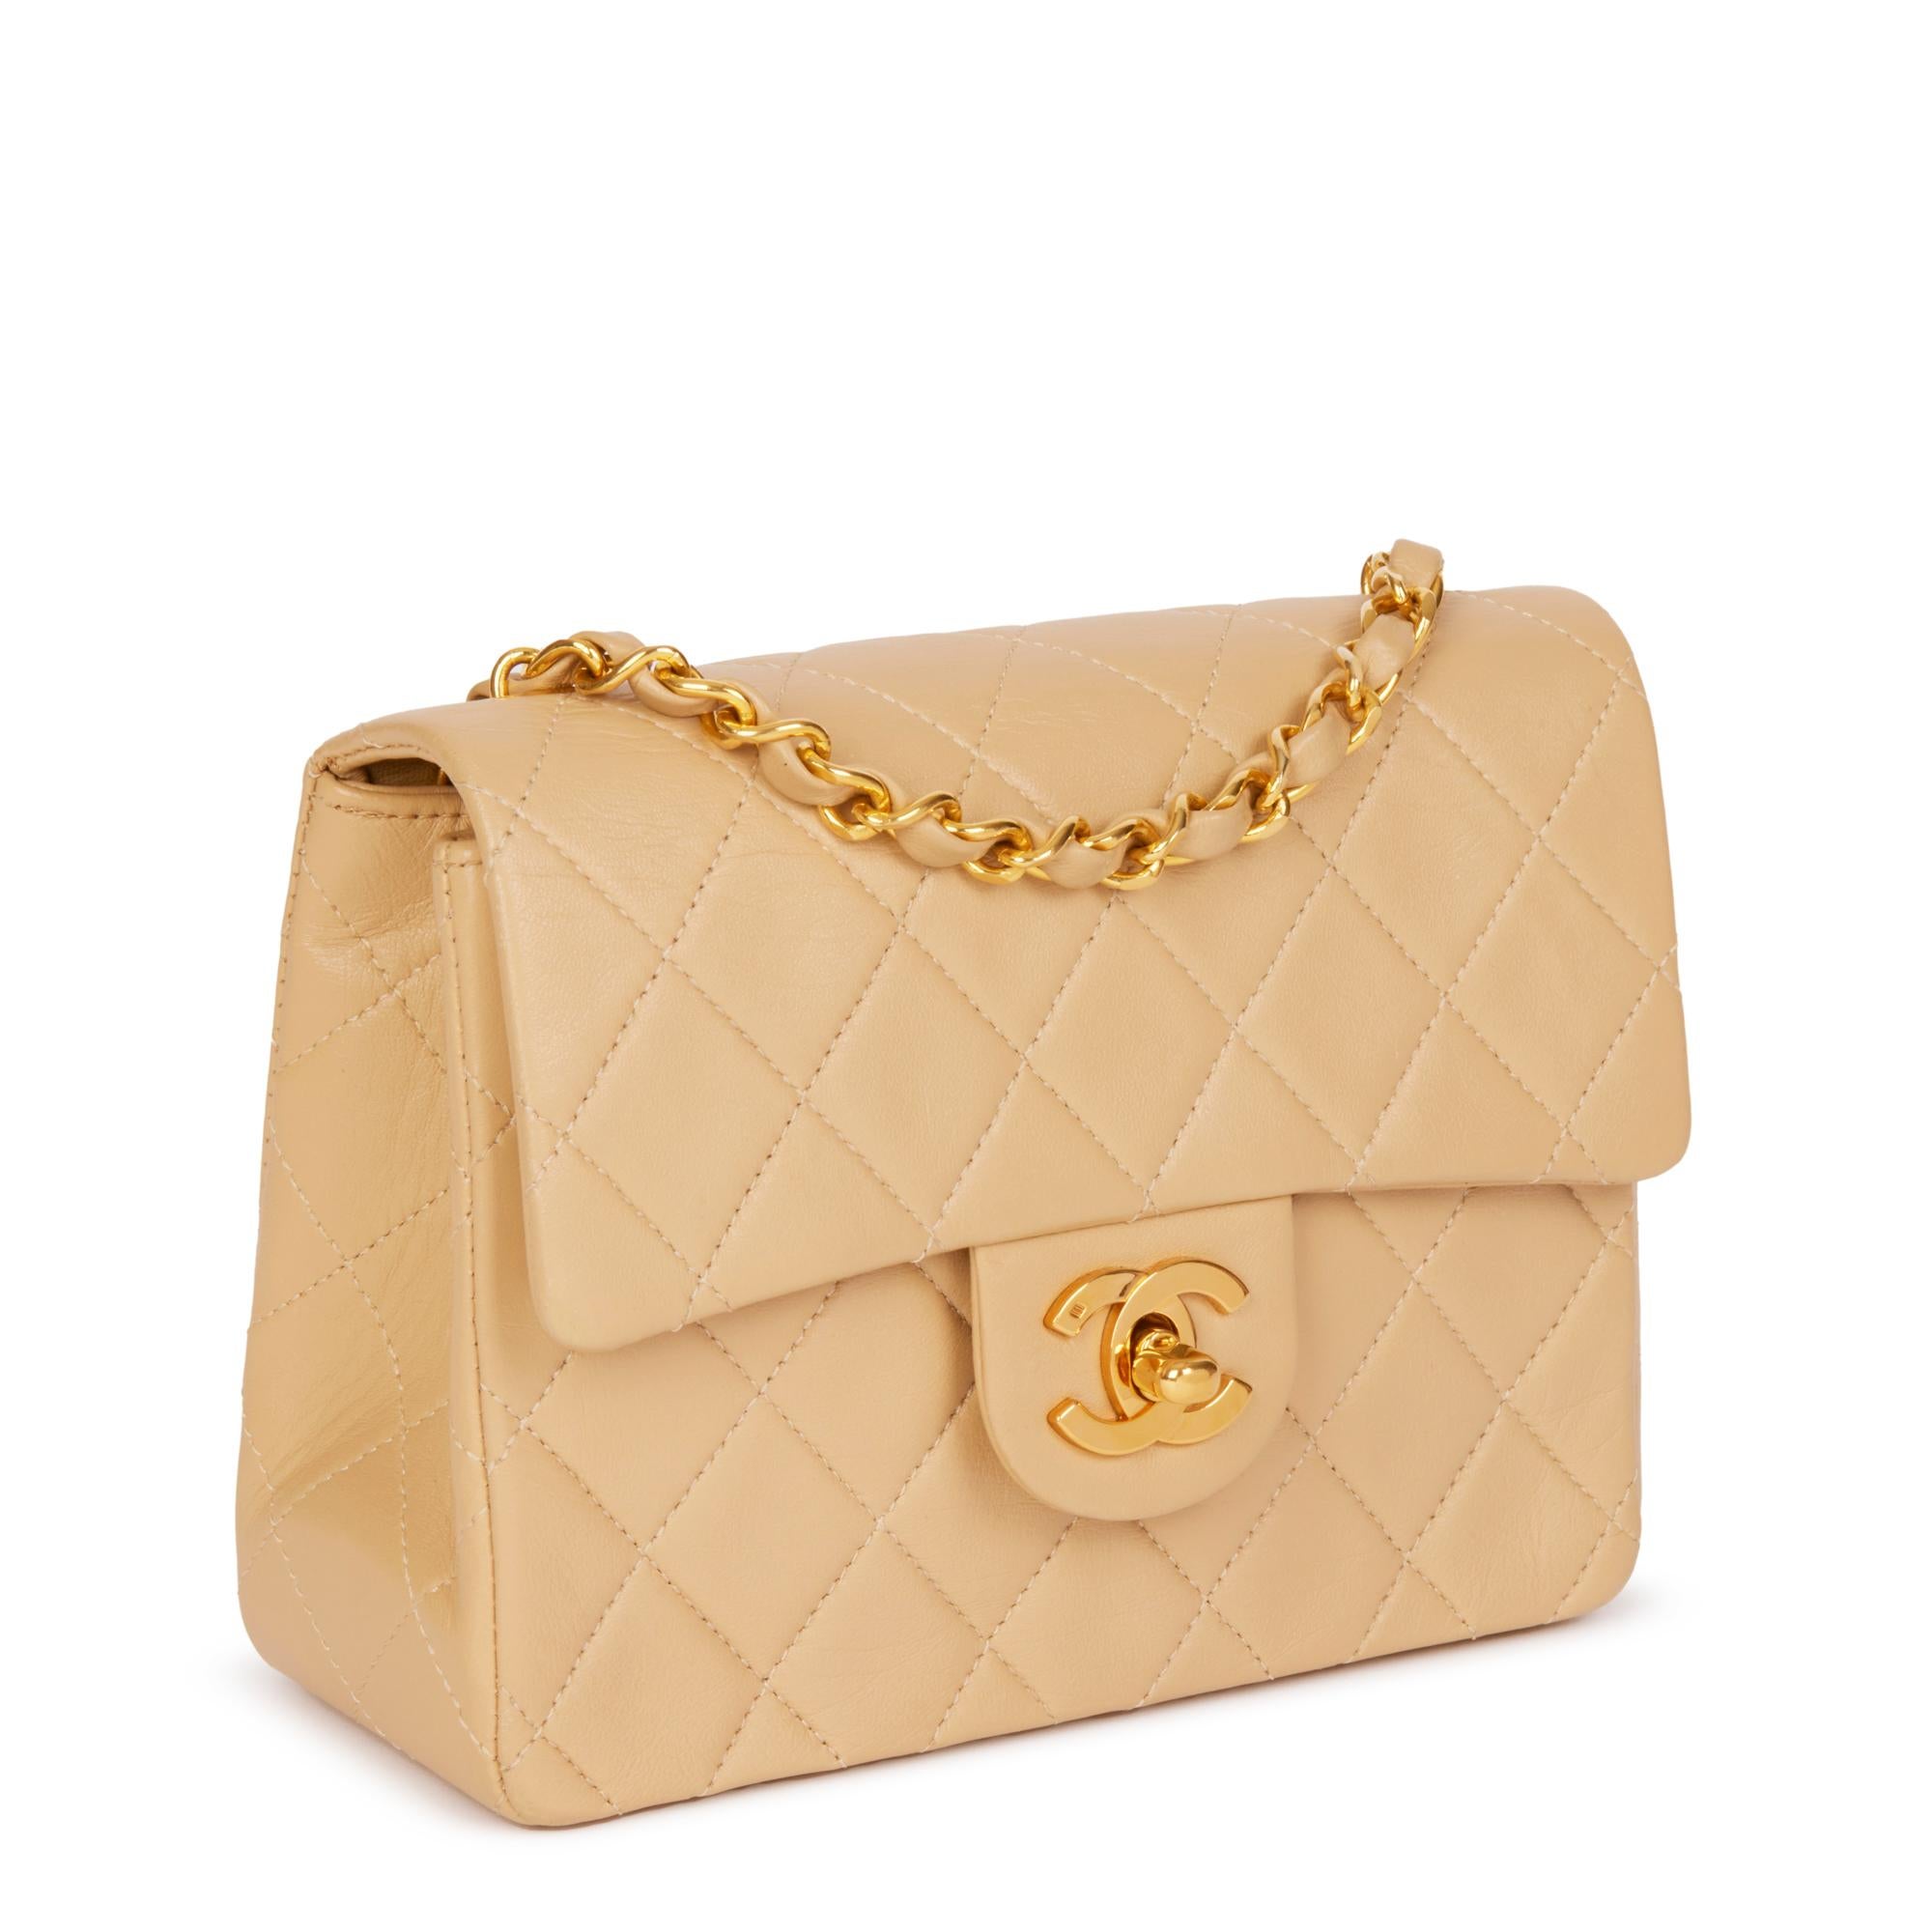 CHANEL
Beige Quilted Lambskin Vintage Mini Flap Bag

Xupes Reference: HB4407
Serial Number: 1218484
Age (Circa): 1989
Accompanied By: Chanel Dust Bag, Authenticity Card
Authenticity Details: Authenticity Card, Serial Sticker (Made in France)